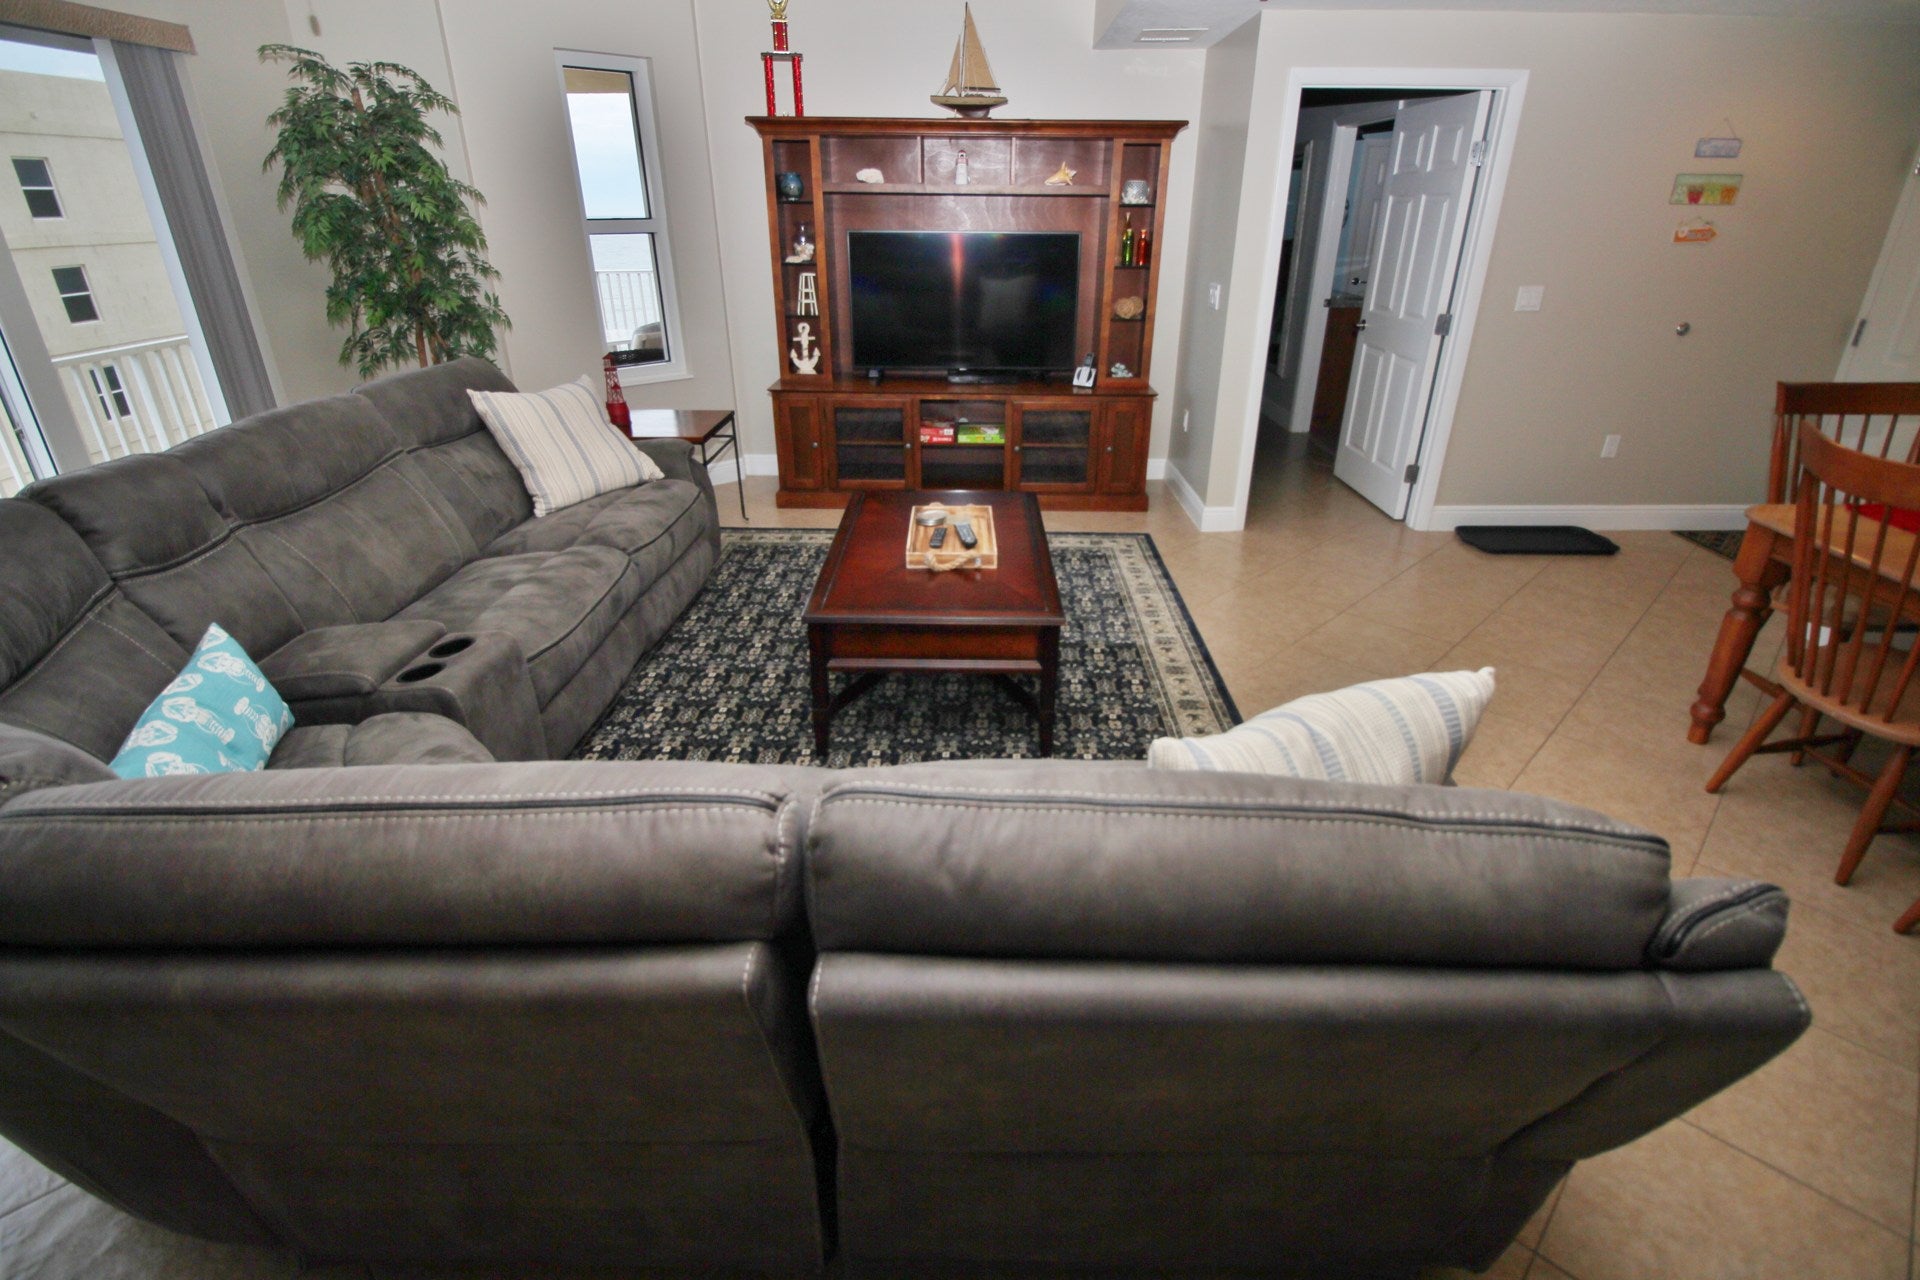 The Living Room offers a large TV for your entertainment